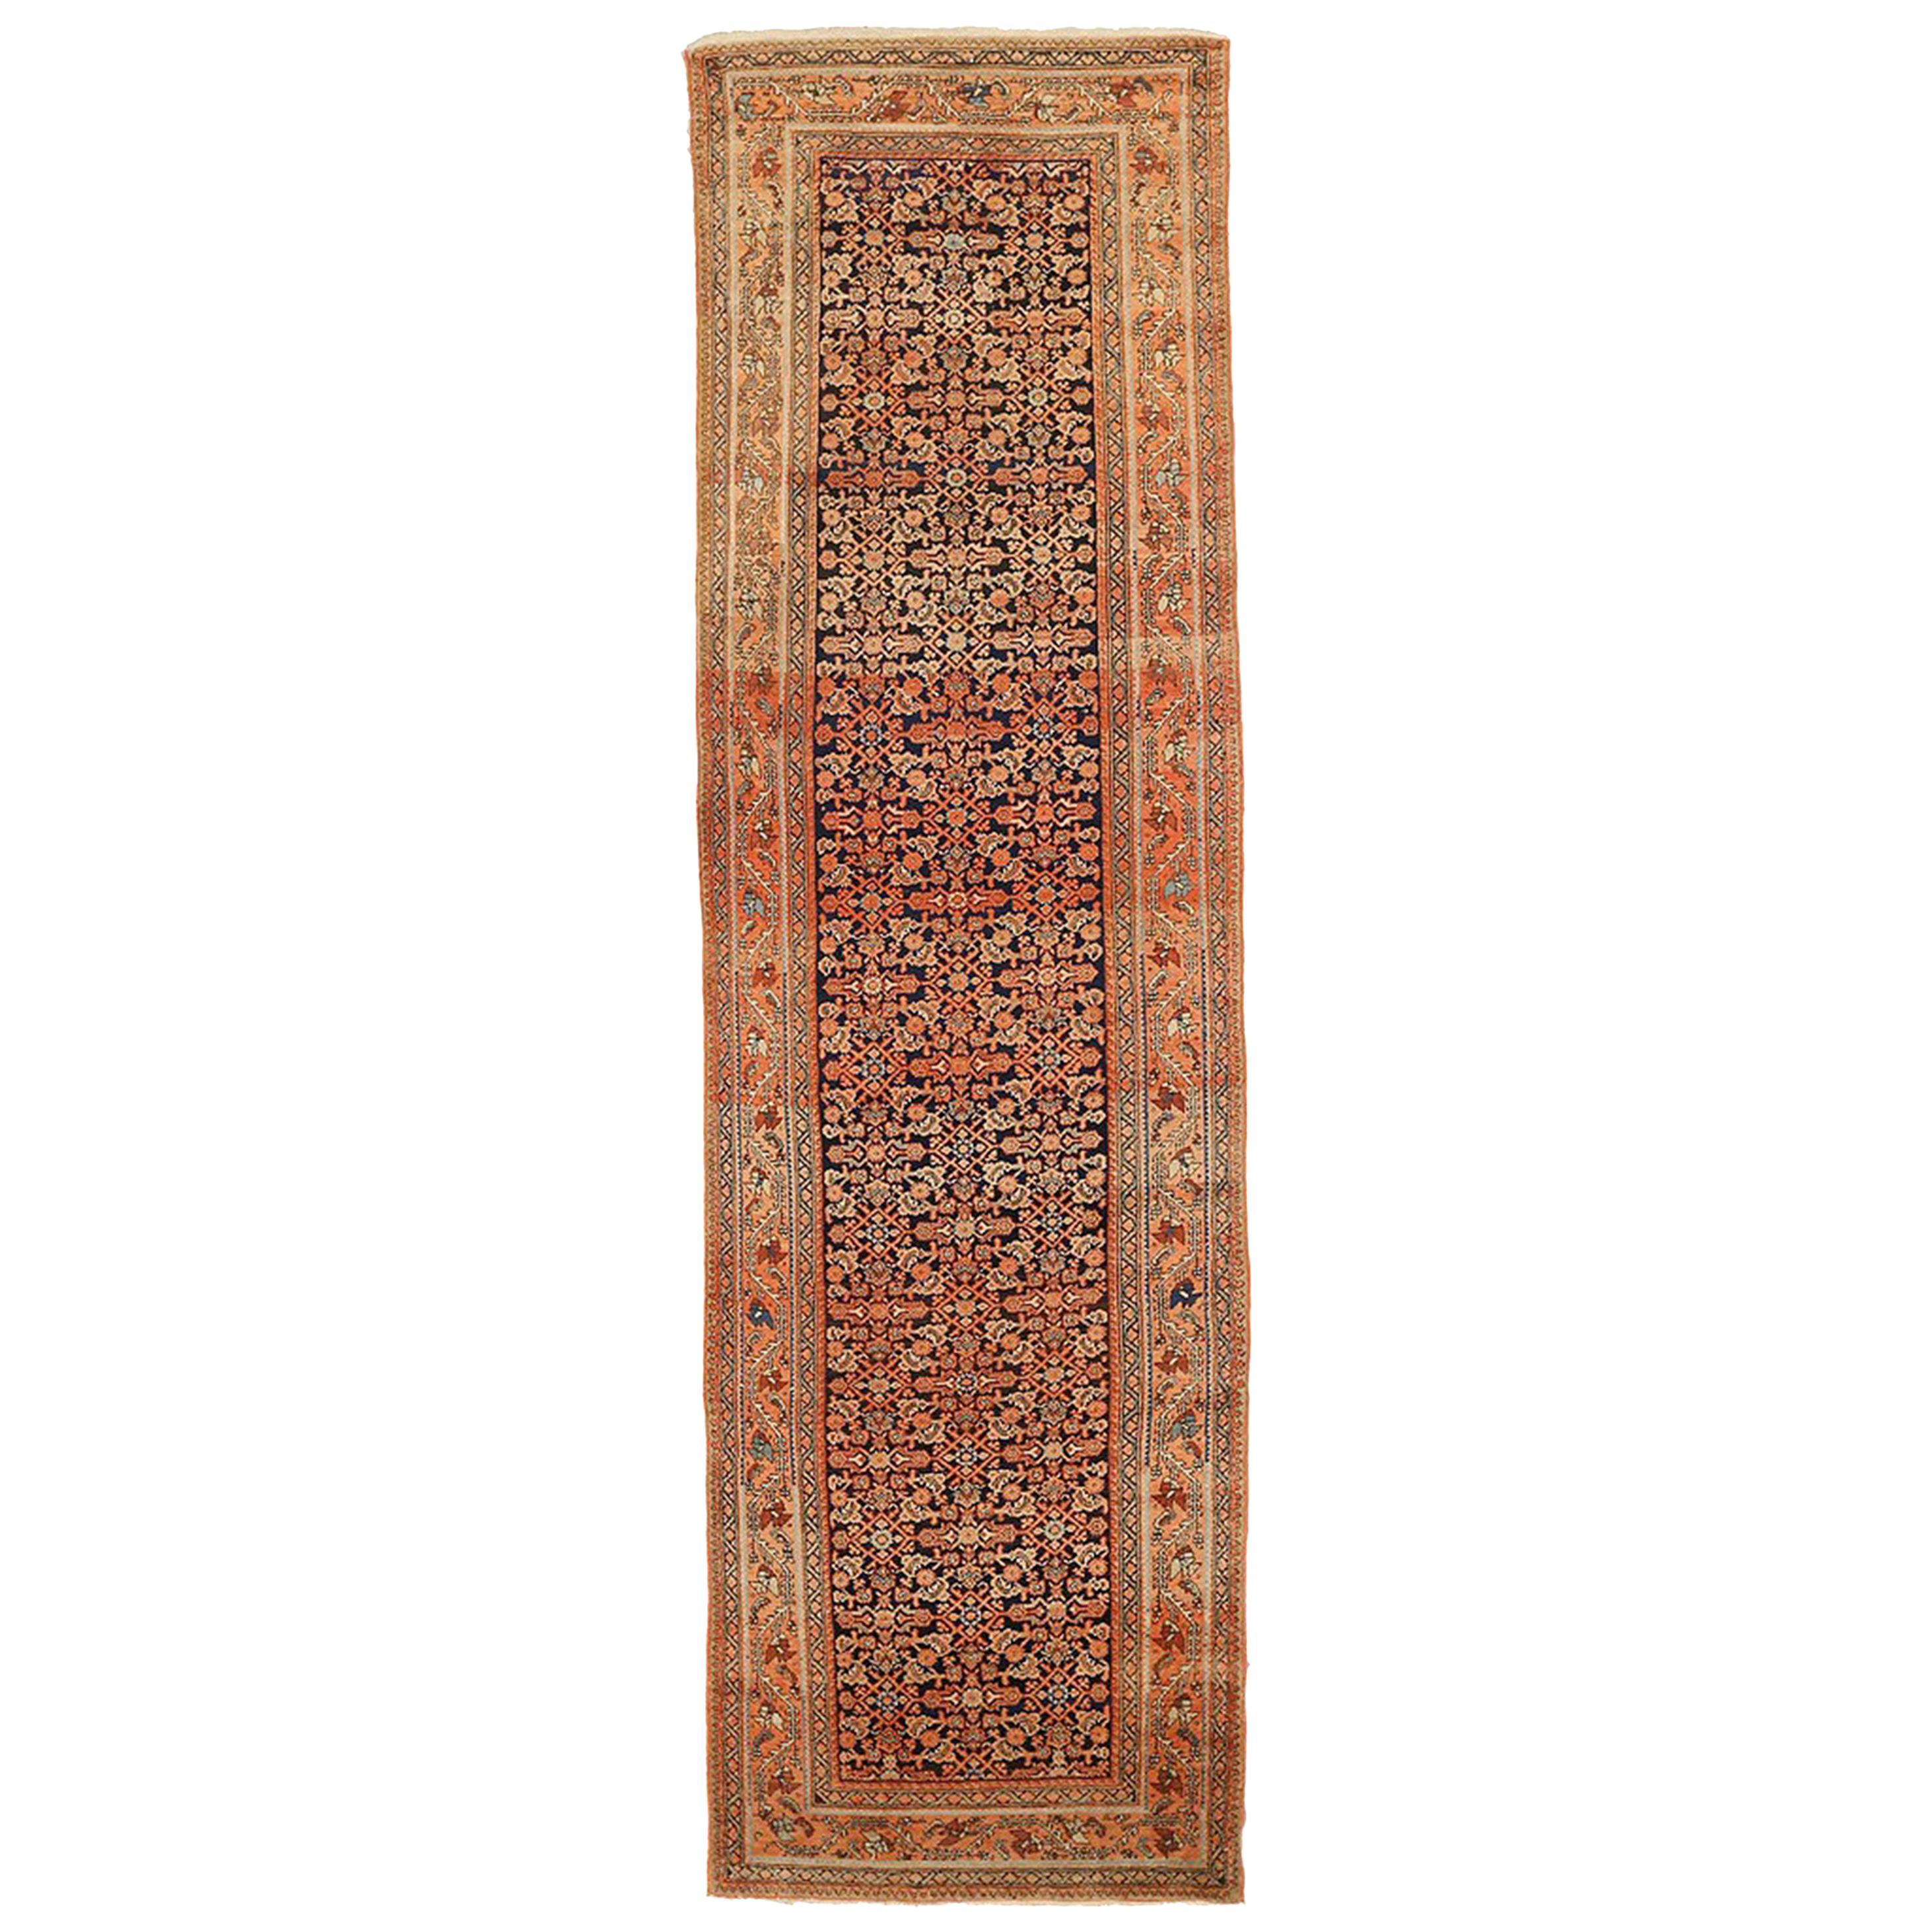 Antique Persian Malayer Runner Rug with Ivory and Brown Flower Details